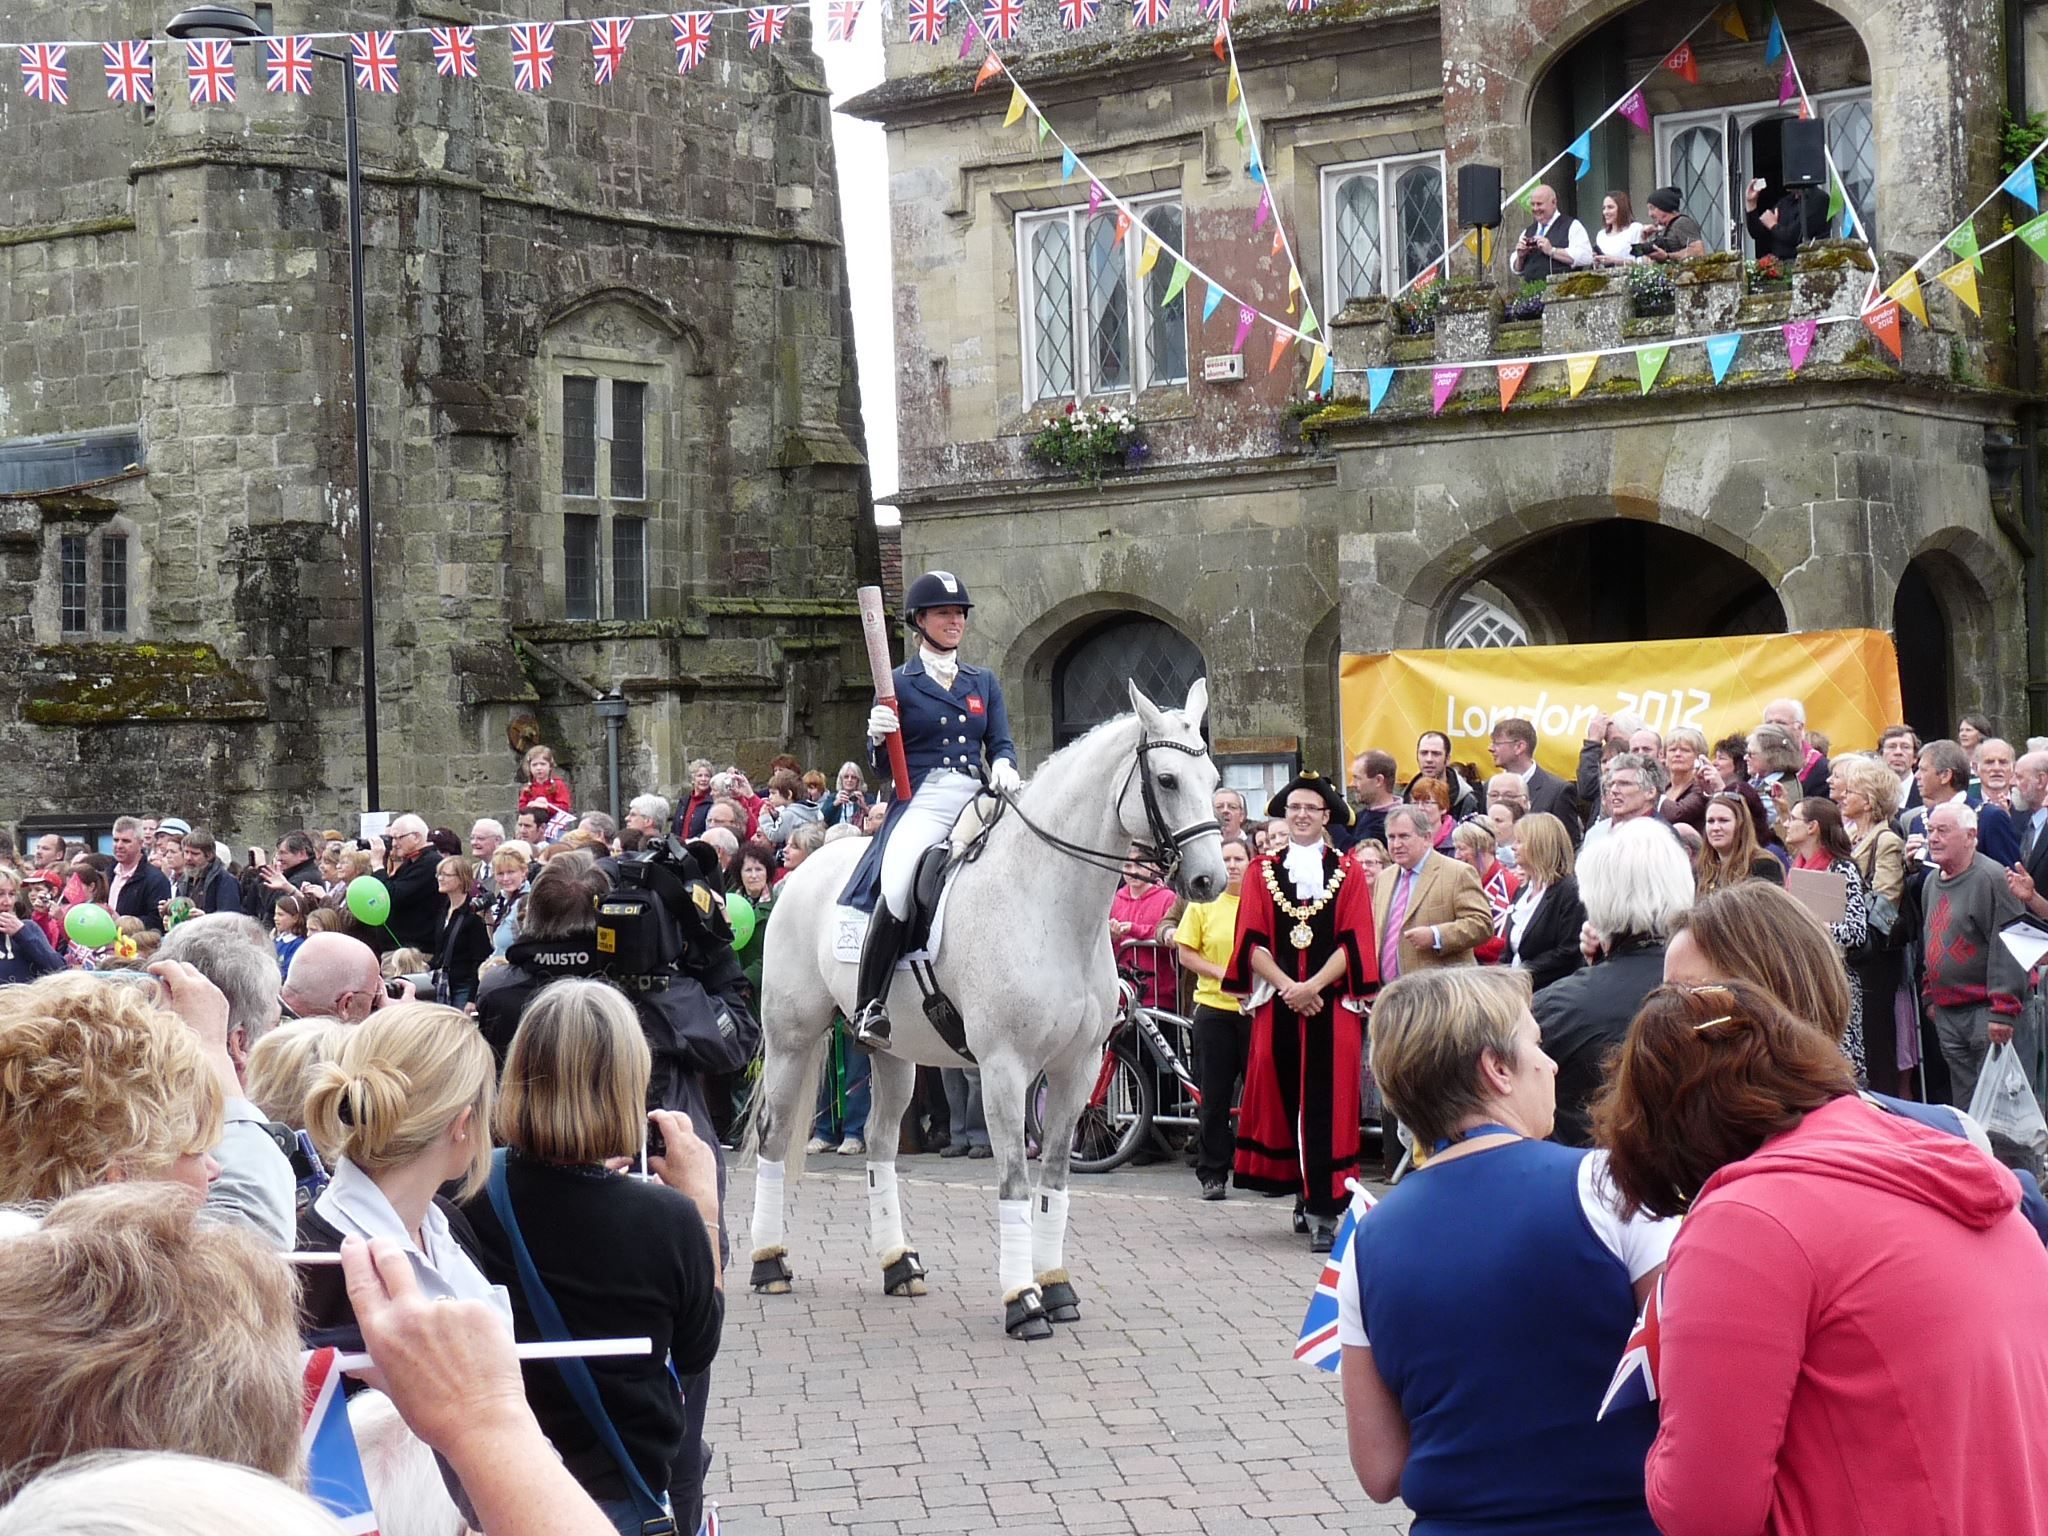 Hannah Biggs riding Southern Cross Stud's Ice Age carrying the 2012 Olympic torch.